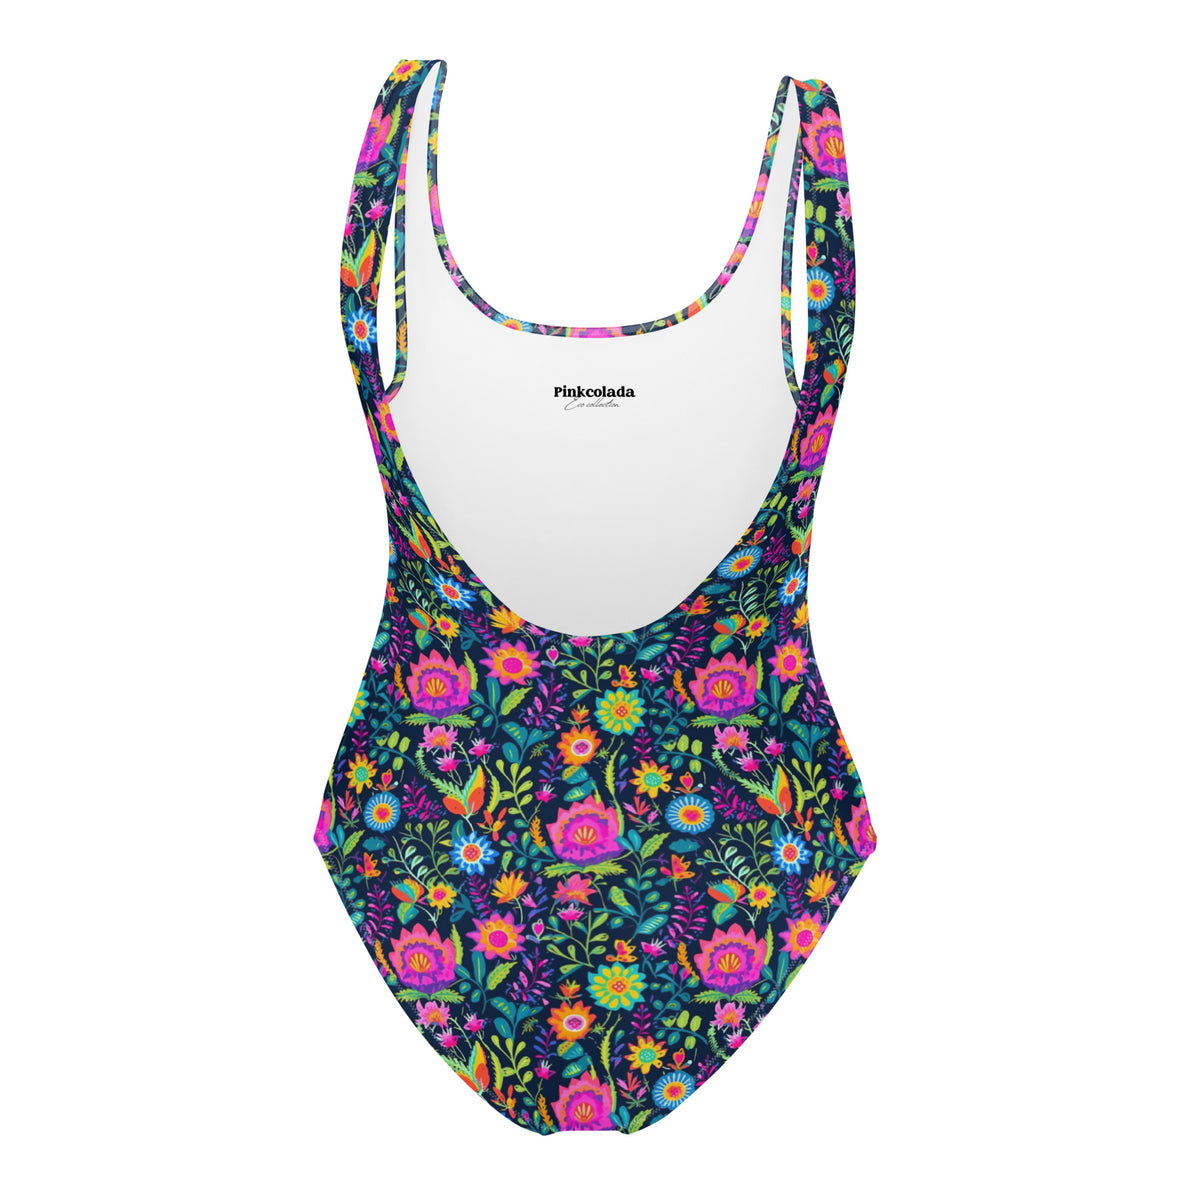 FLORIDA ECO ONE PIECE SWIMSUIT - MEXICANA NIGHTS